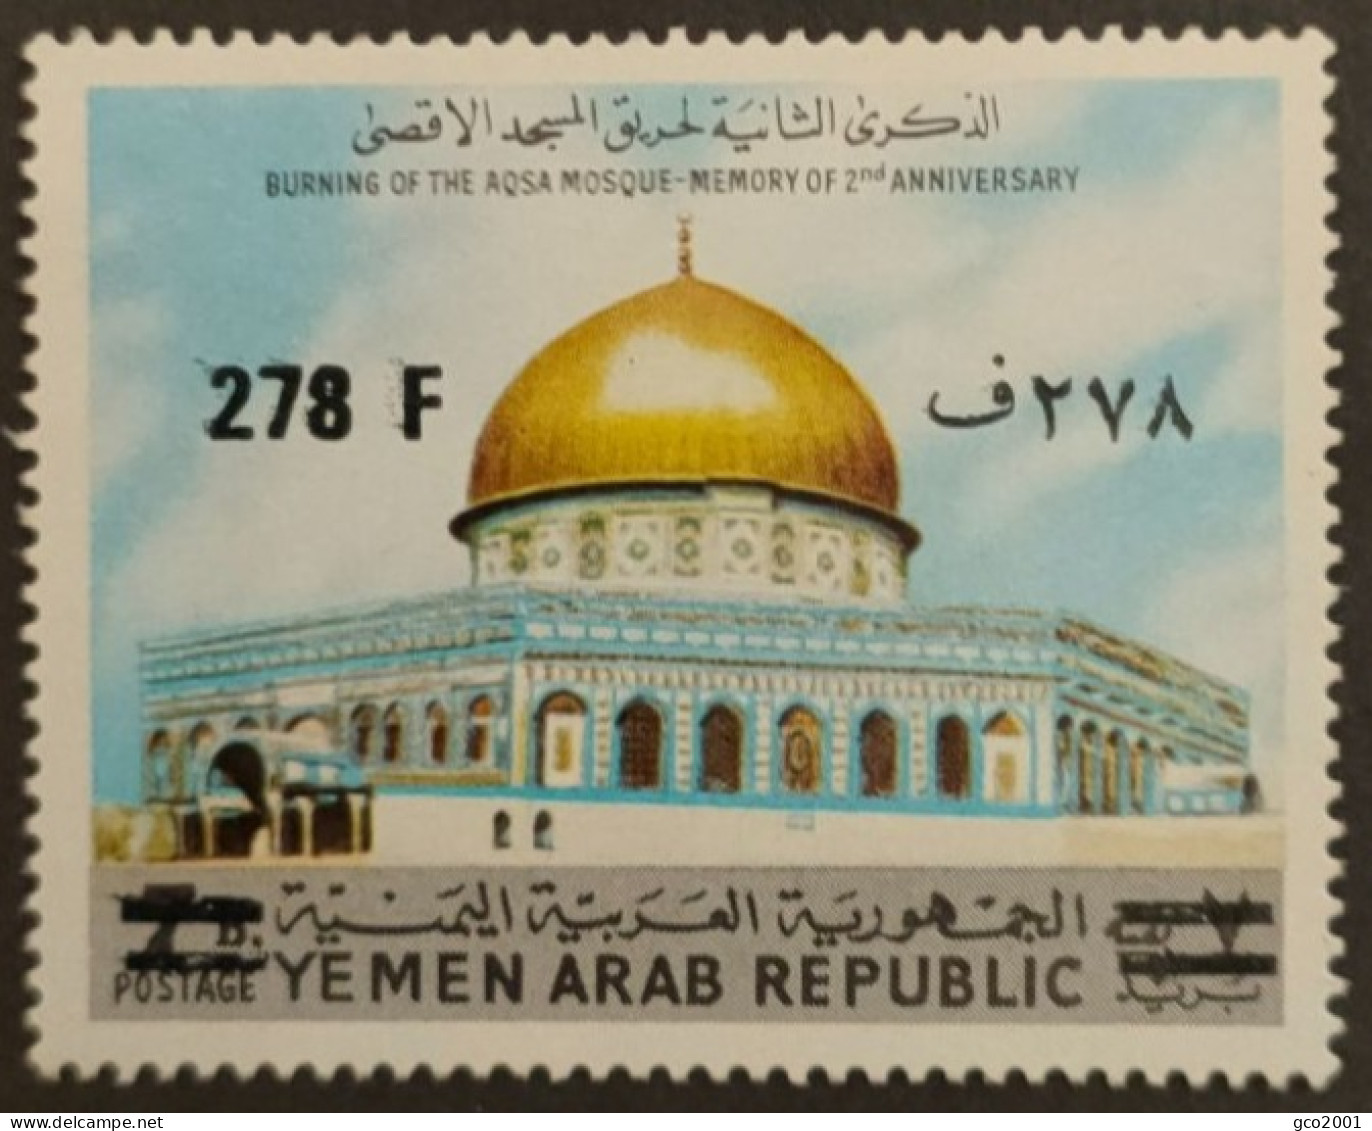 YEMEN / YT 284 / MOSQUEE AL AQSA - RELIGION / NEUF ** / MNH - Mosques & Synagogues